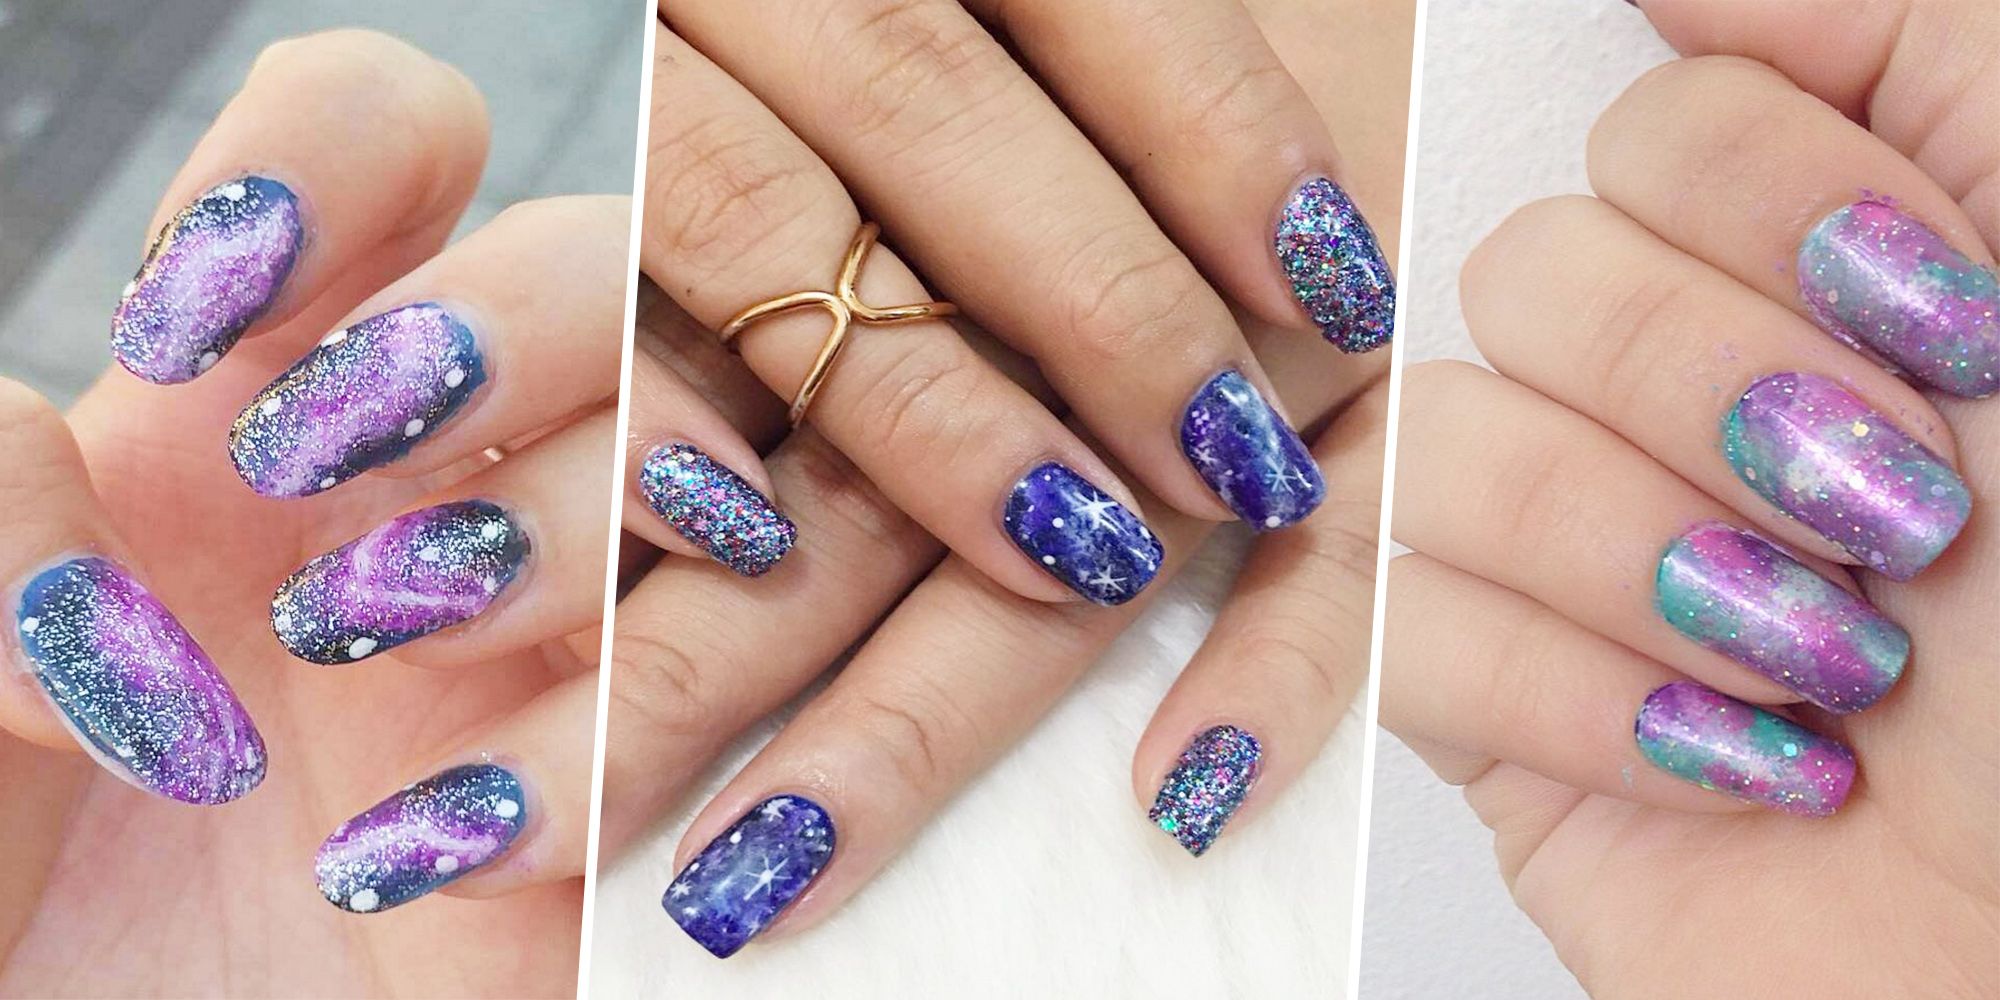 4. Galaxy Nail Design with Sponge - wide 7